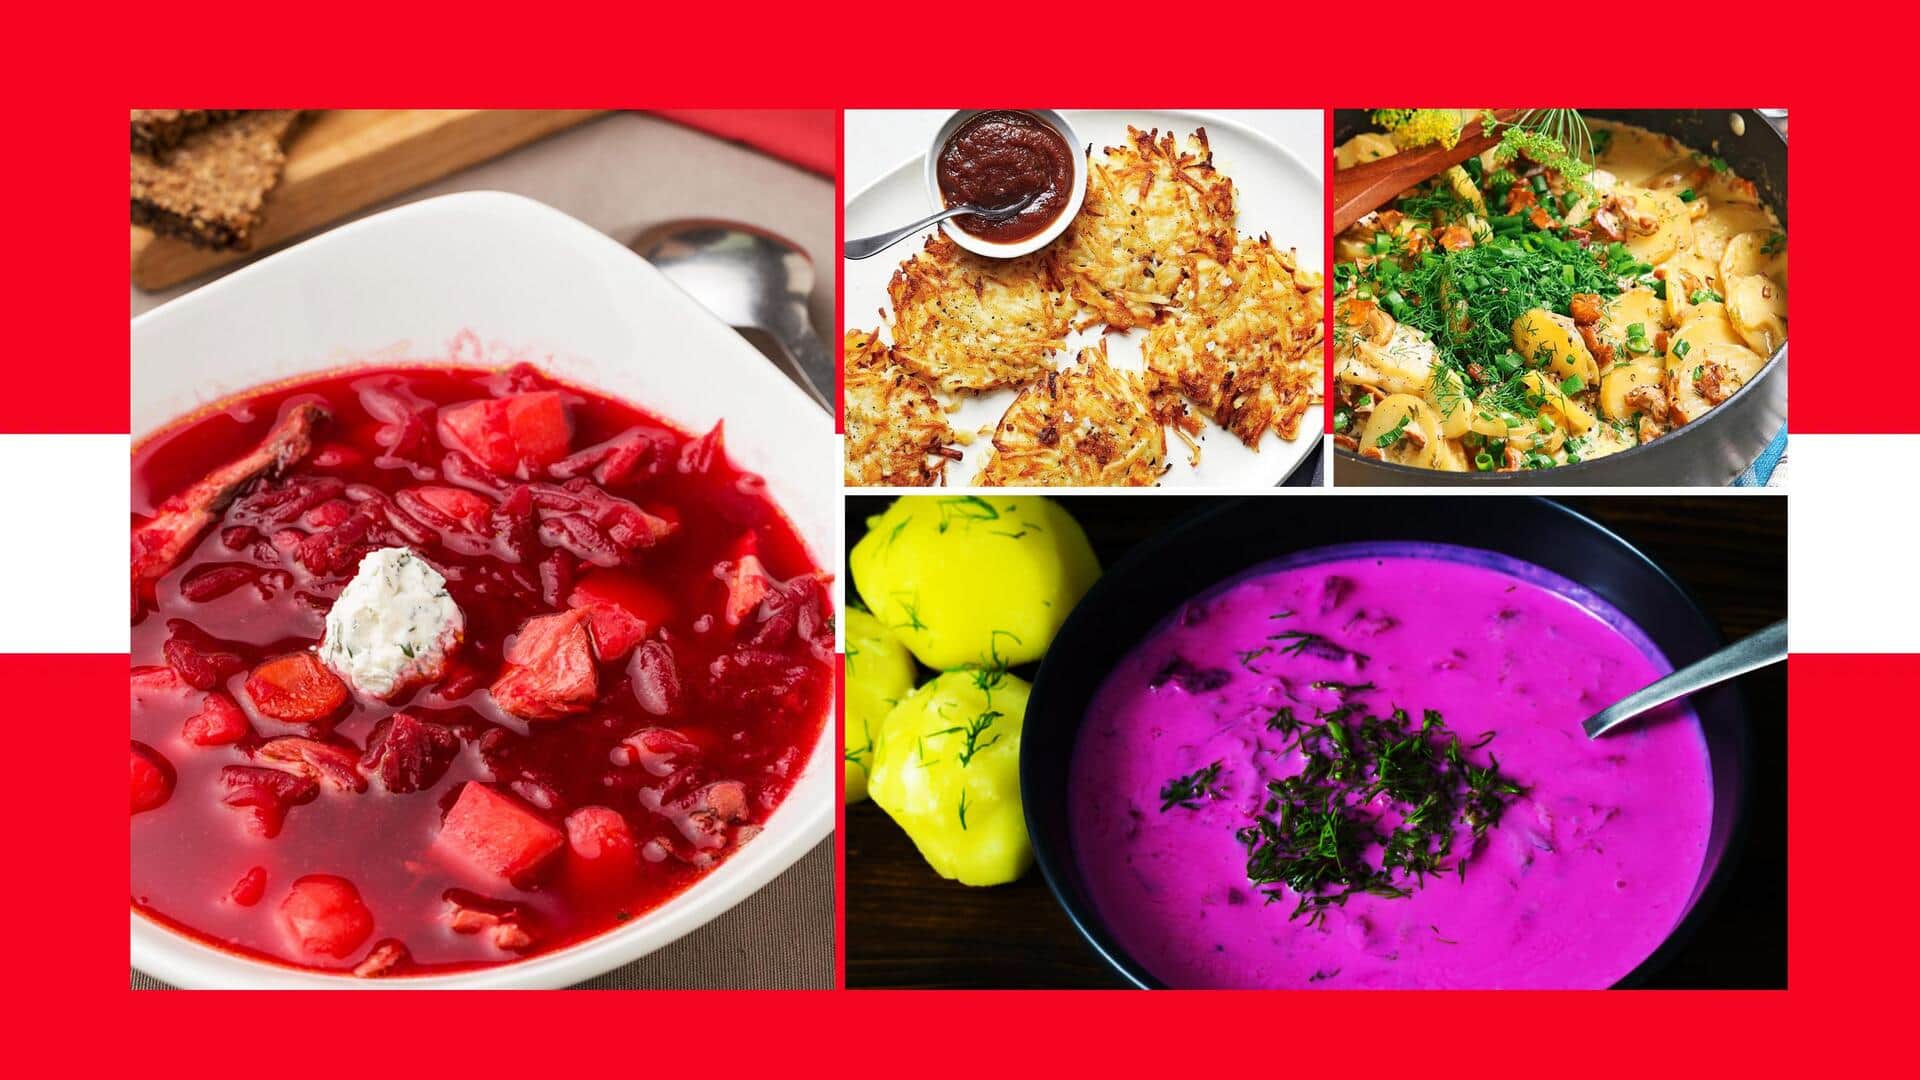 Explore Latvia's flavorful side with these vegetarian dishes